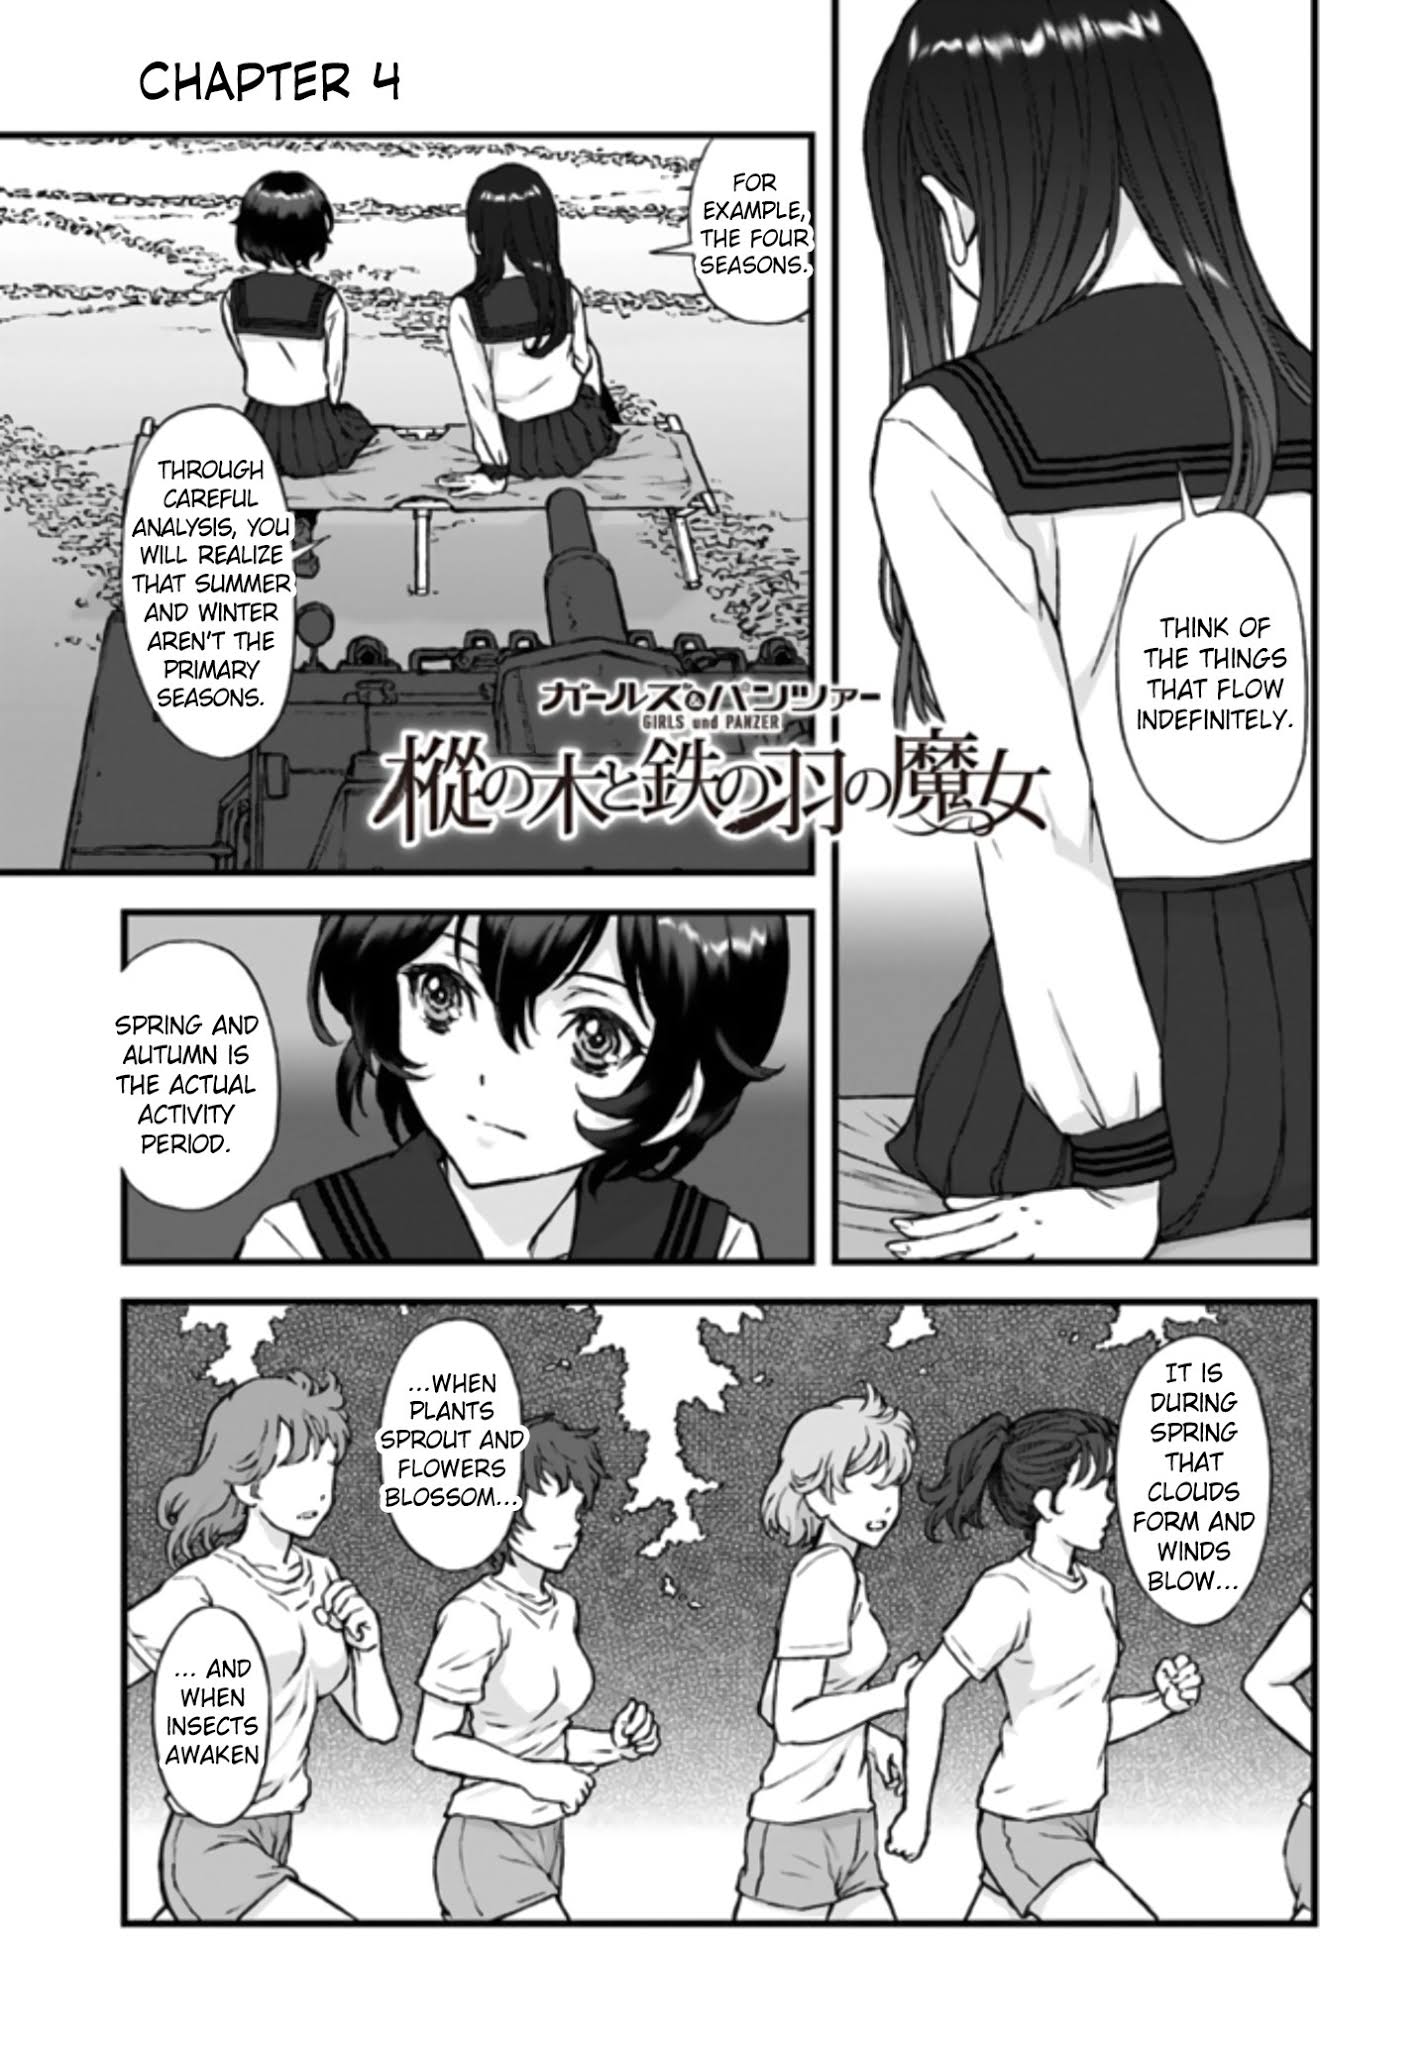 Girls Und Panzer - The Fir Tree And The Iron-Winged Witch Chapter 4 #1